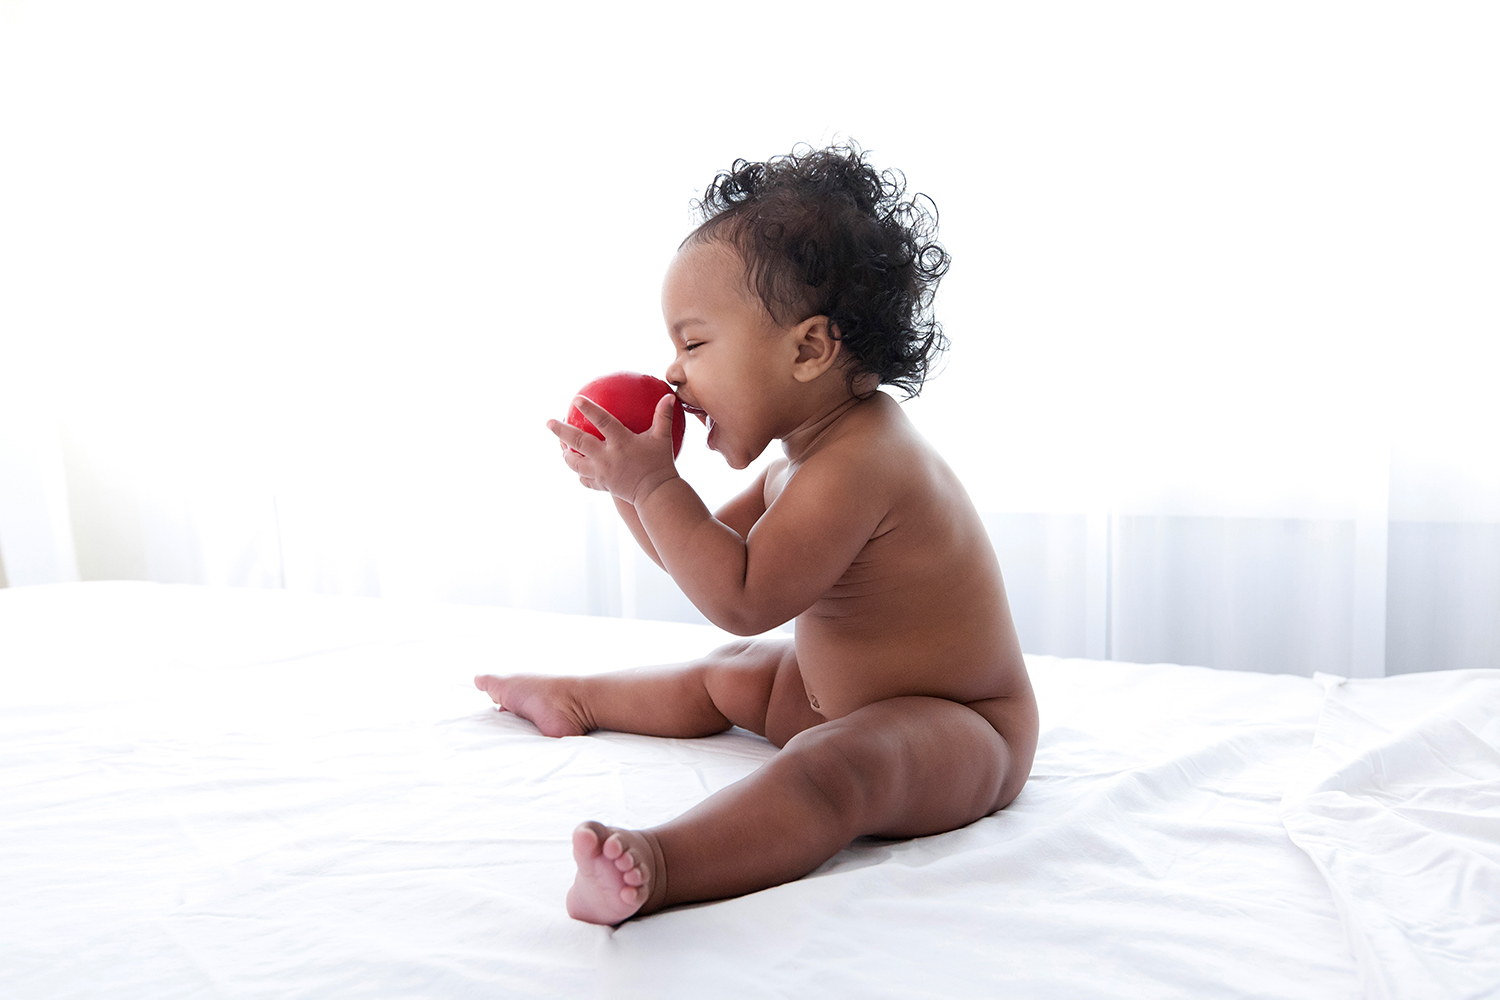 see baby playing with red ball